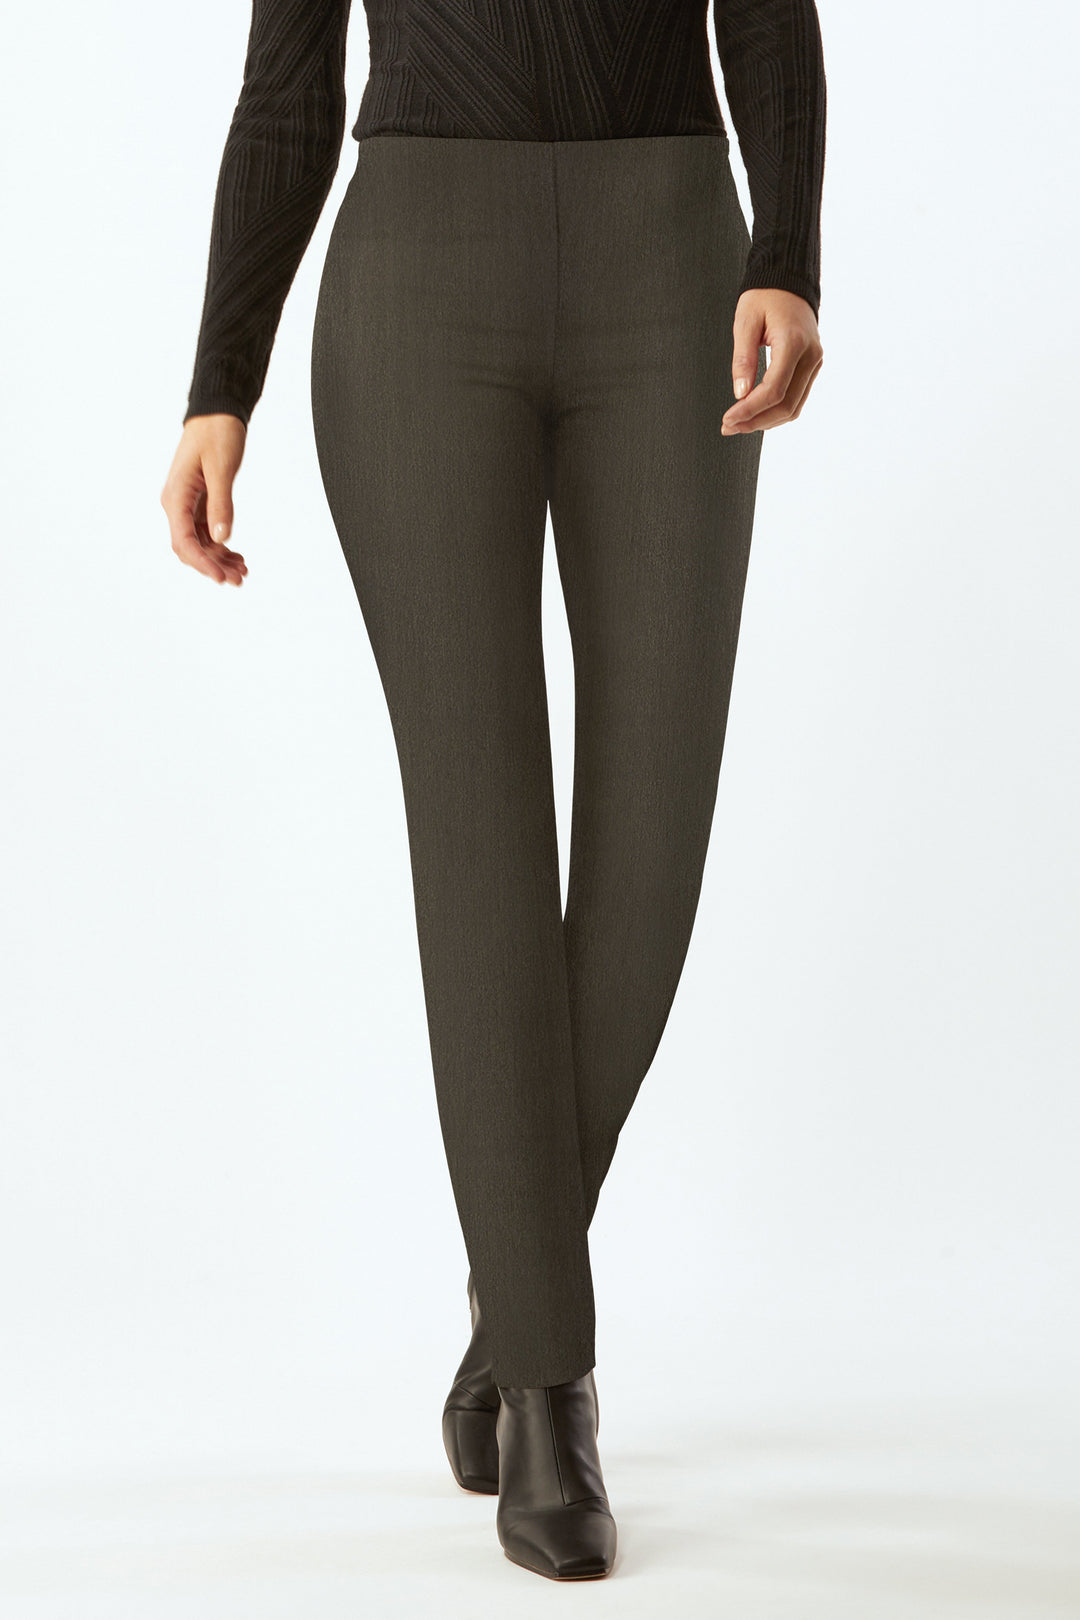 Springfield Classic Pull-On In 5Th Avenue Stretch - Charcoal Grey